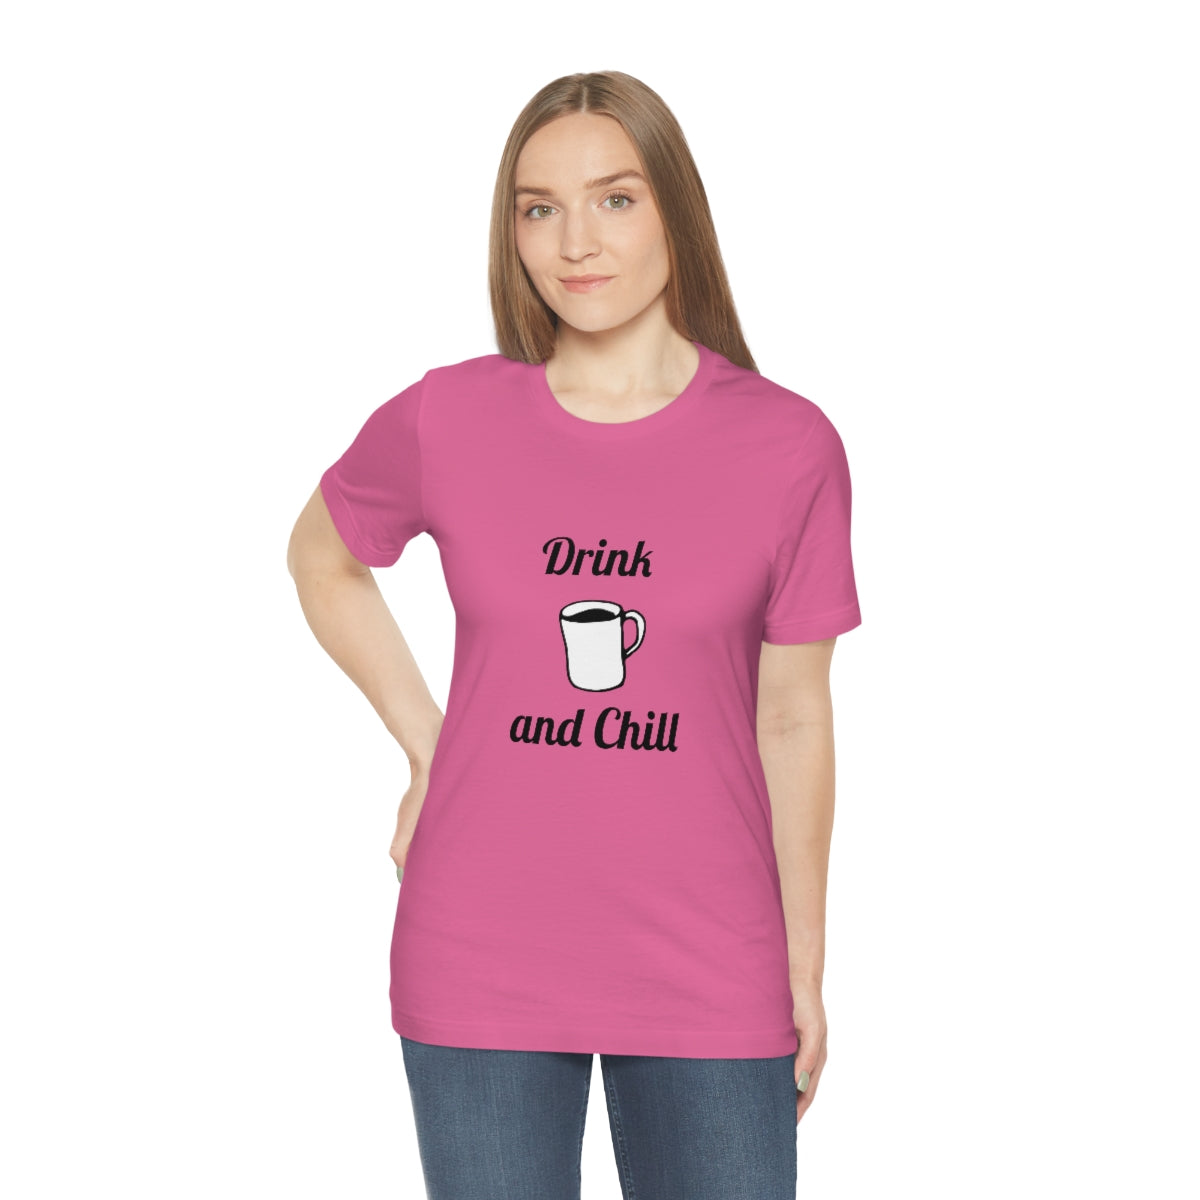 Drink coffee and chill #2 - Funny - Unisex Short Sleeve Tee